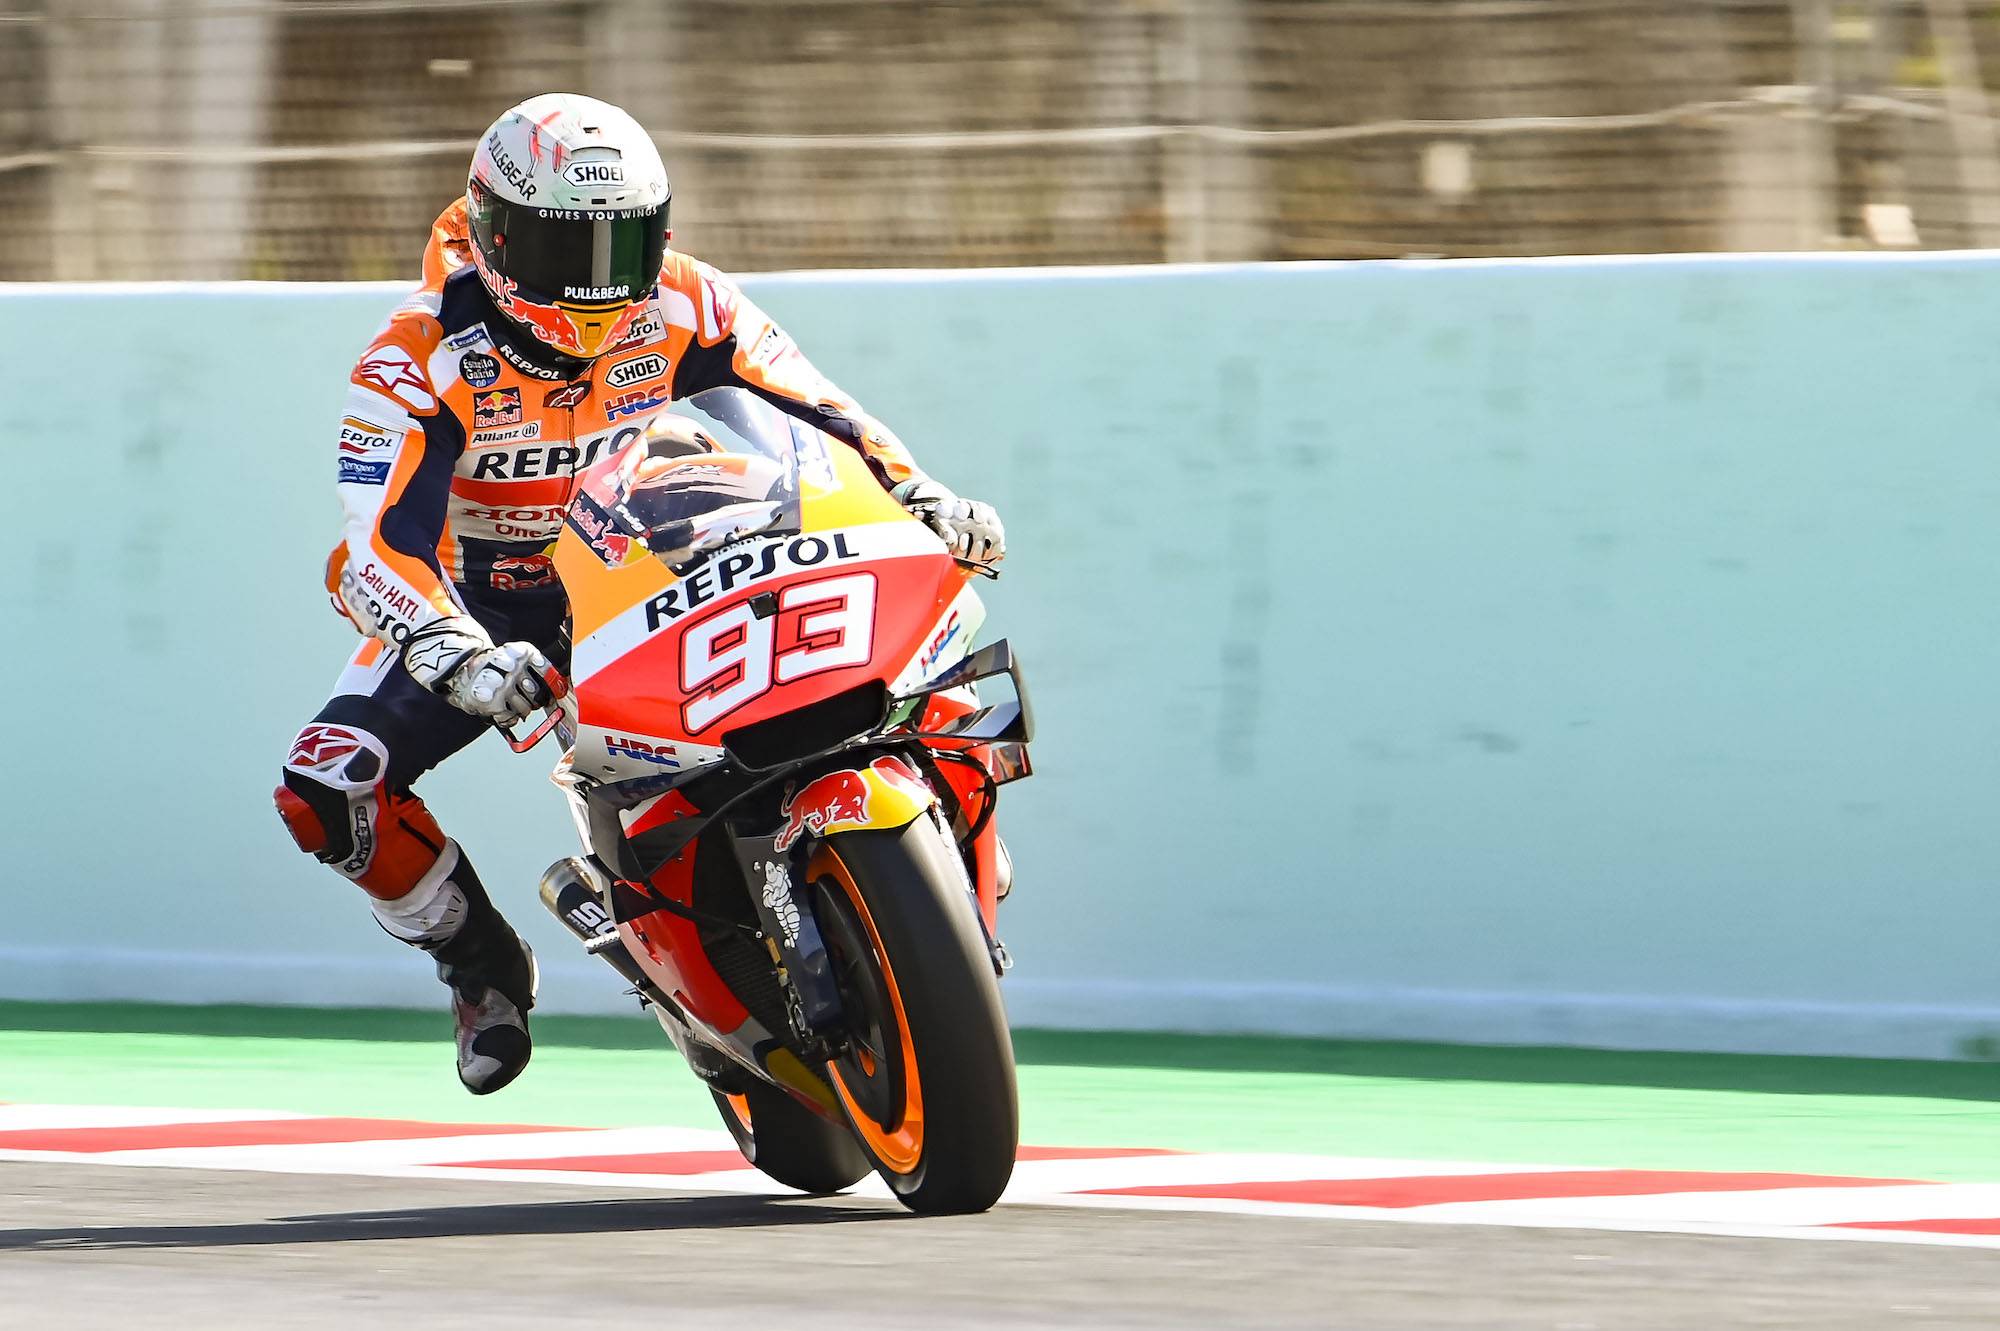 Marc Marquez Latest News, Videos, Photos and More